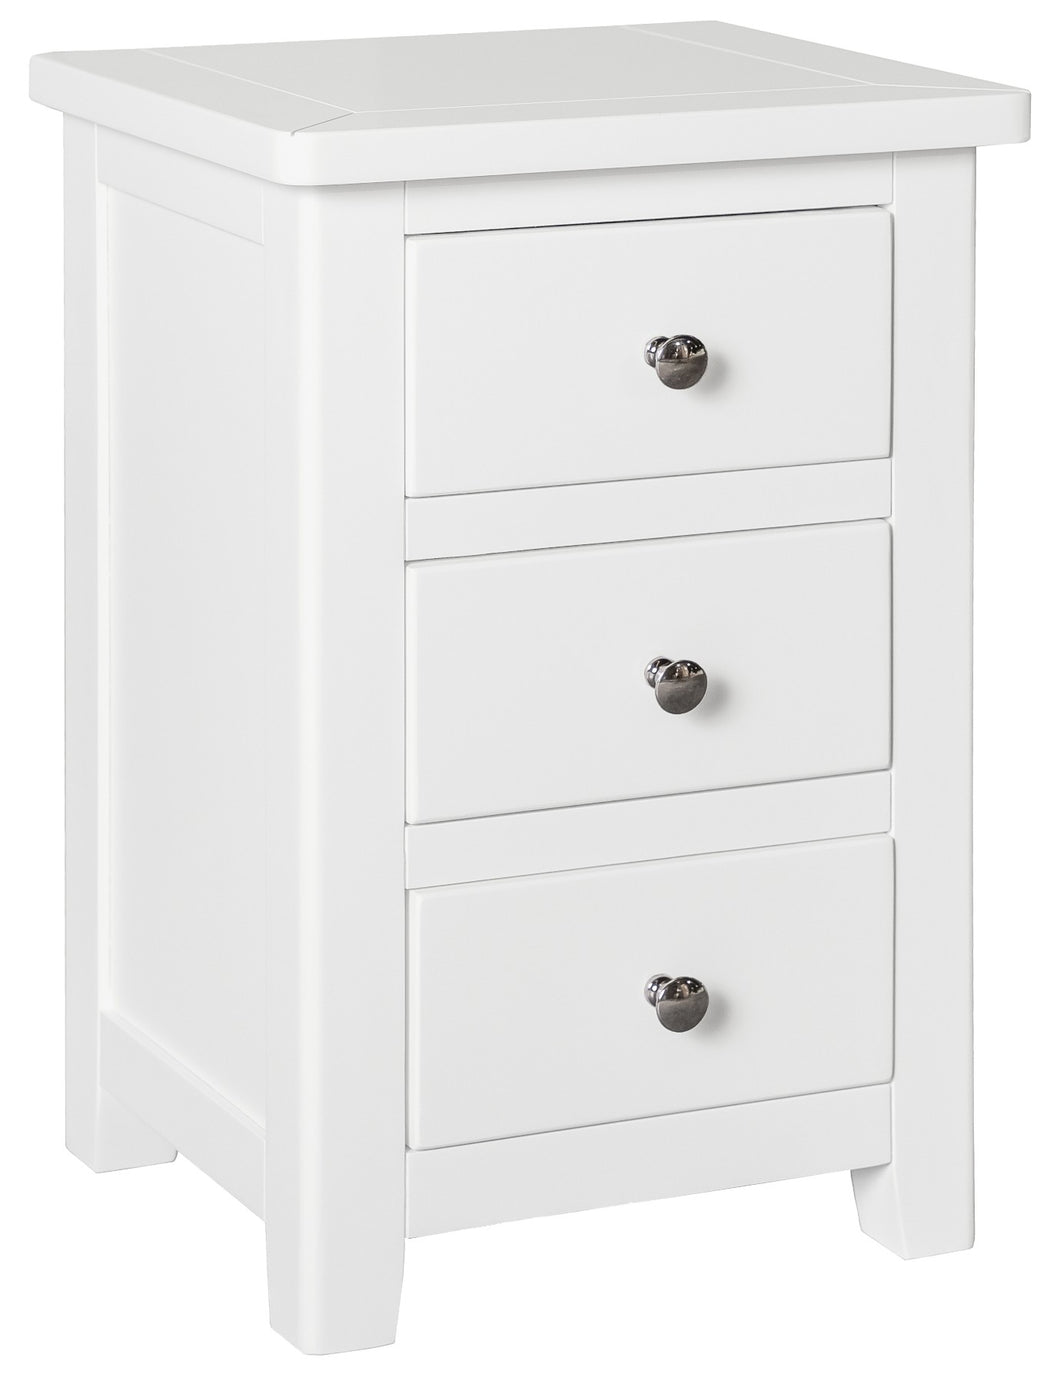 Hatton 3 Drawer Bedside - Painted White or Grey